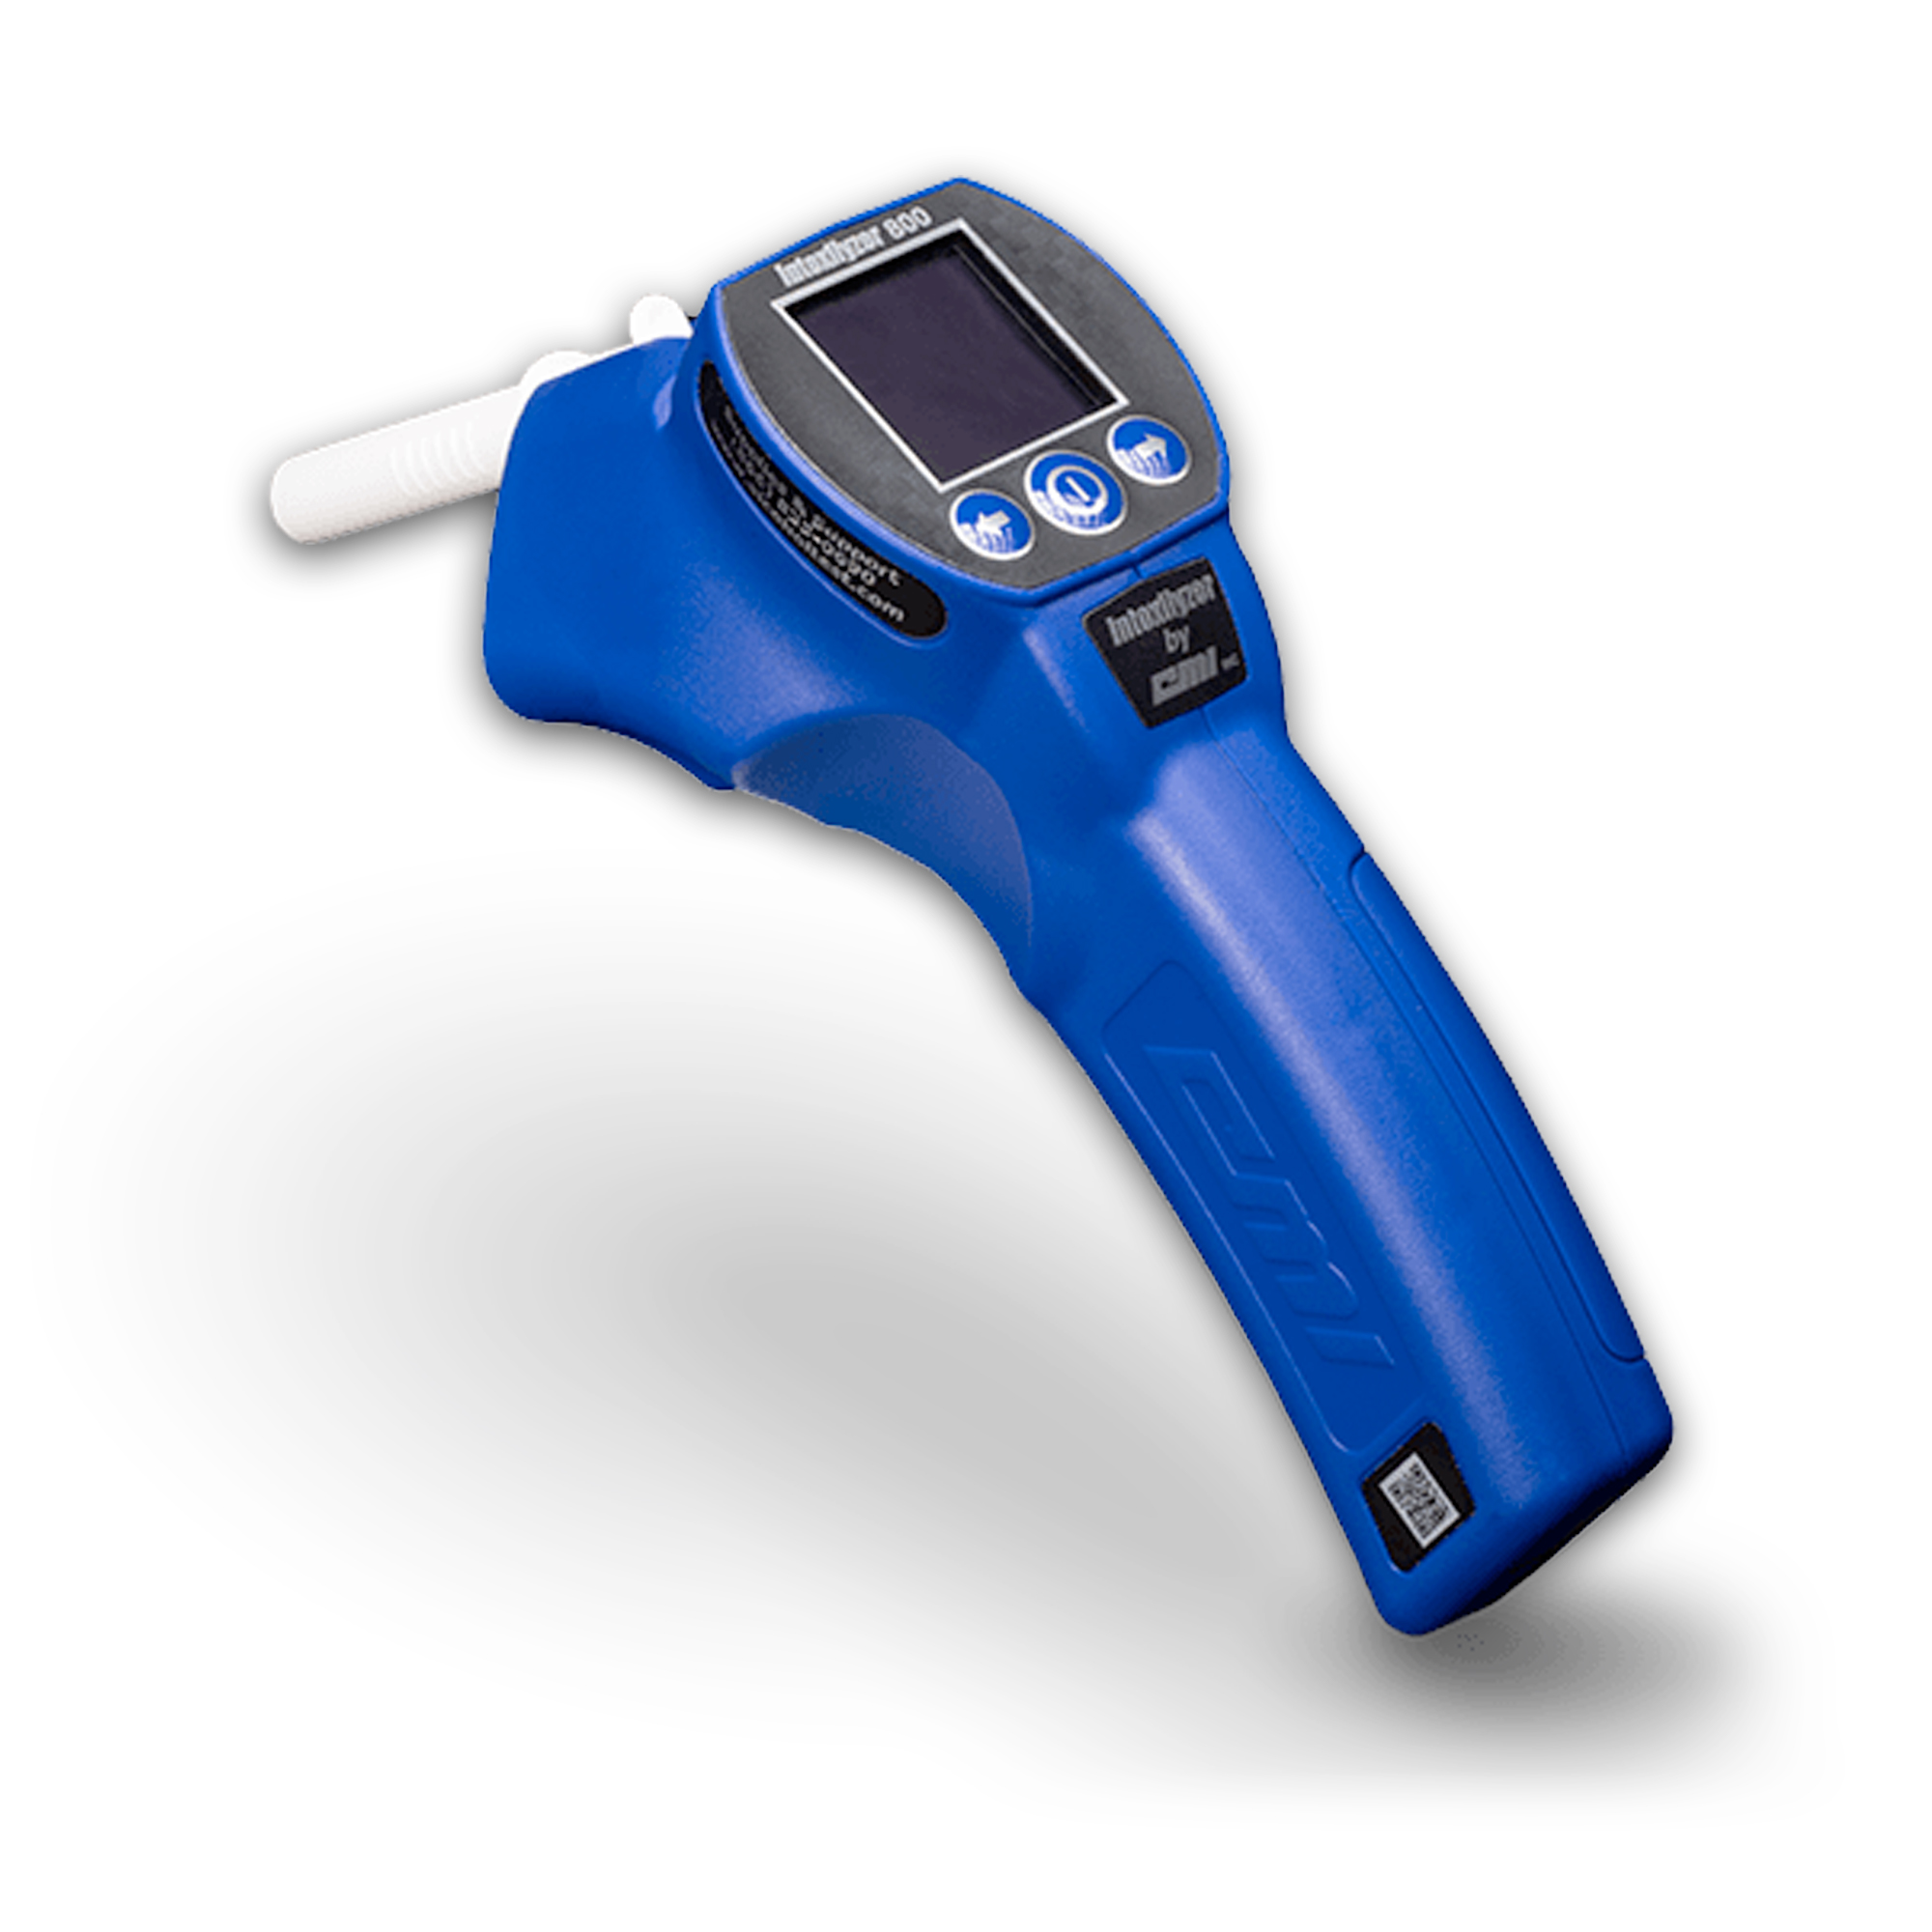 Alcohol Analyzers & Strips Products, Supplies and Equipment